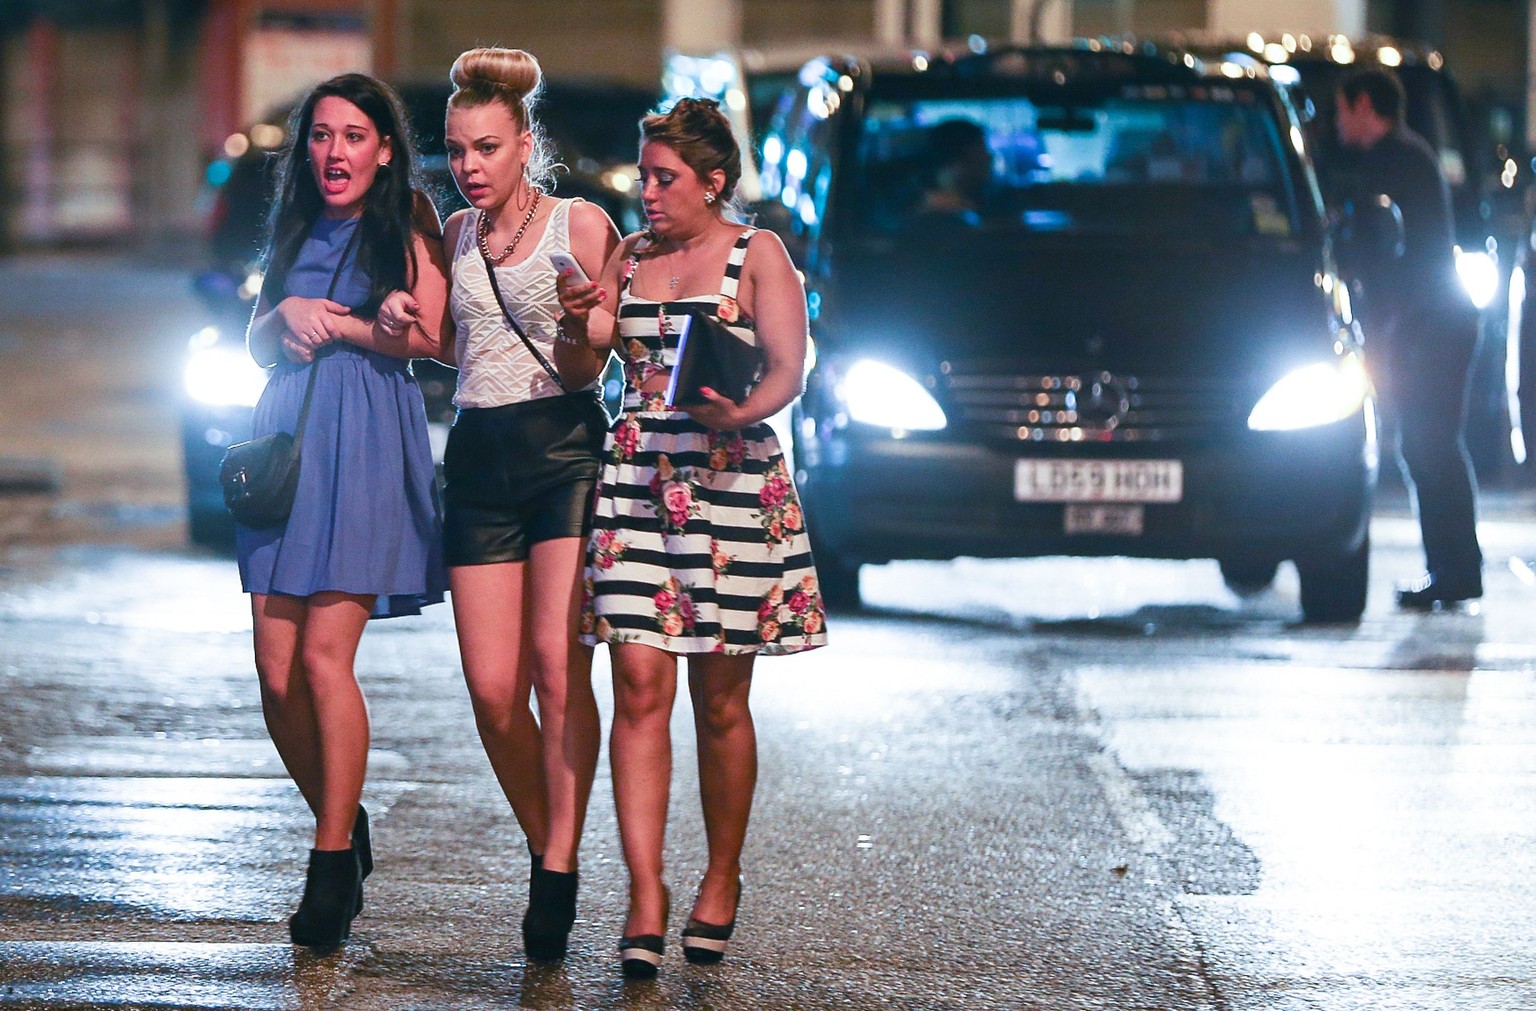 Mandatory Credit: Photo by London News Pictures/REX/Shutterstock (3466396f)
Three women cross the street towards the Printworks nightclub venue
New Year's celebrations, Manchester, Britain - 31 Dec  ...